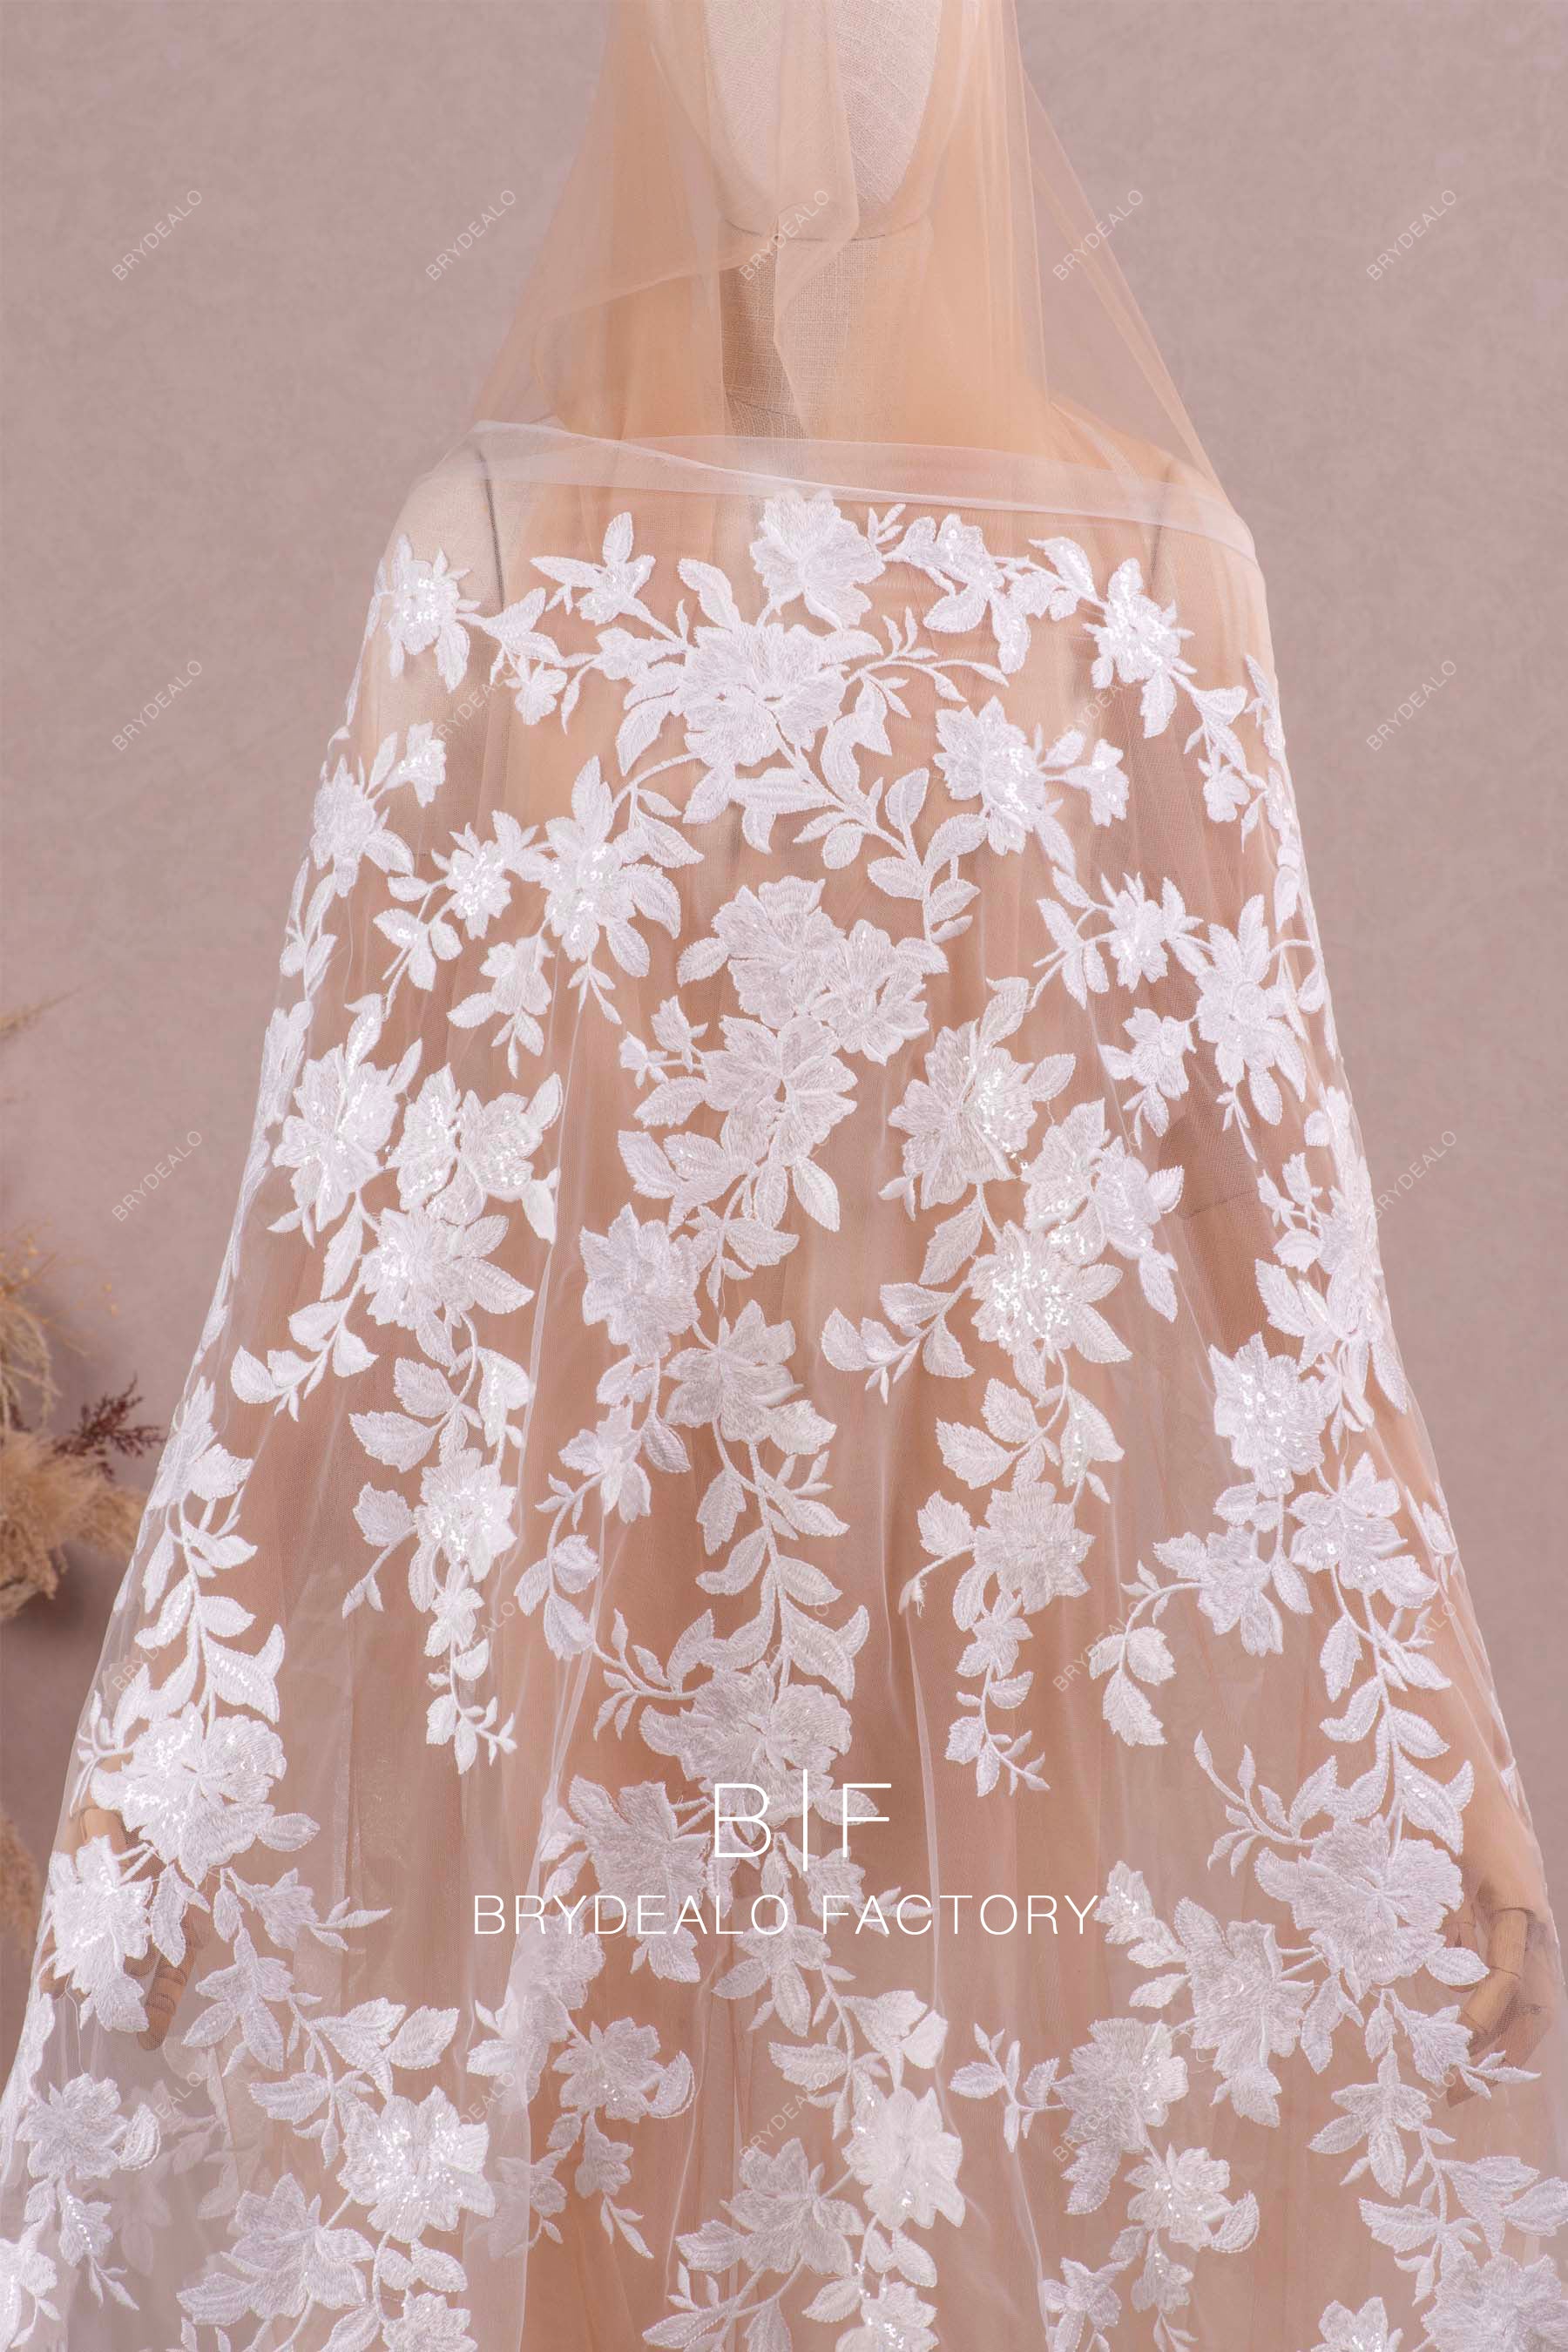 shimmery flower lace